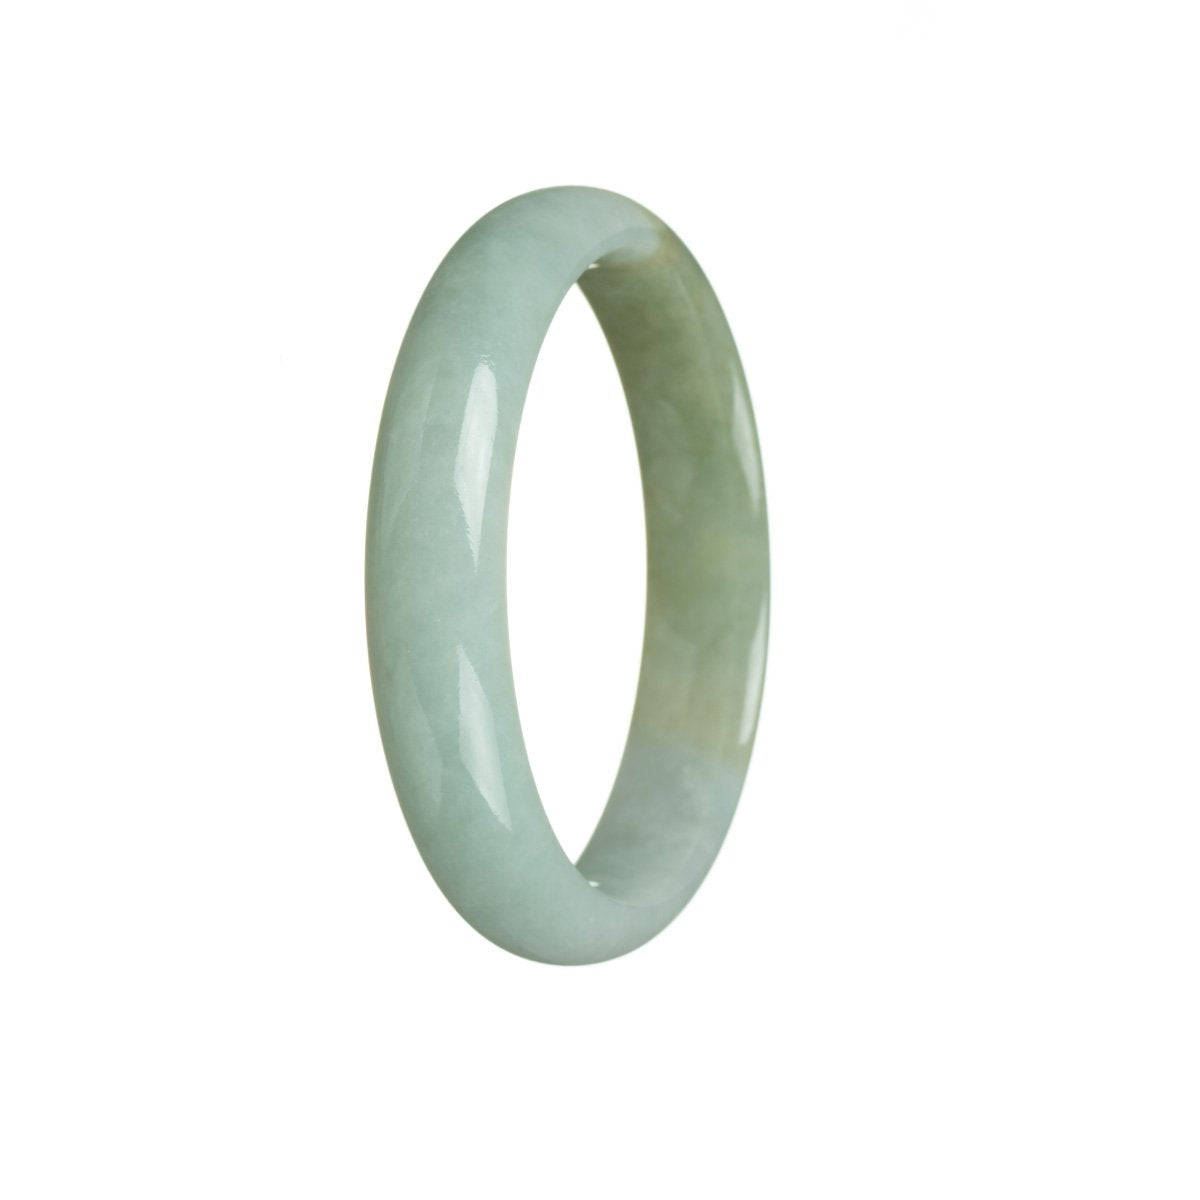 A beautiful, high-quality light green and olive green jade bangle bracelet with a unique half moon design, measuring 56mm. Perfect for adding a touch of elegance to any outfit.